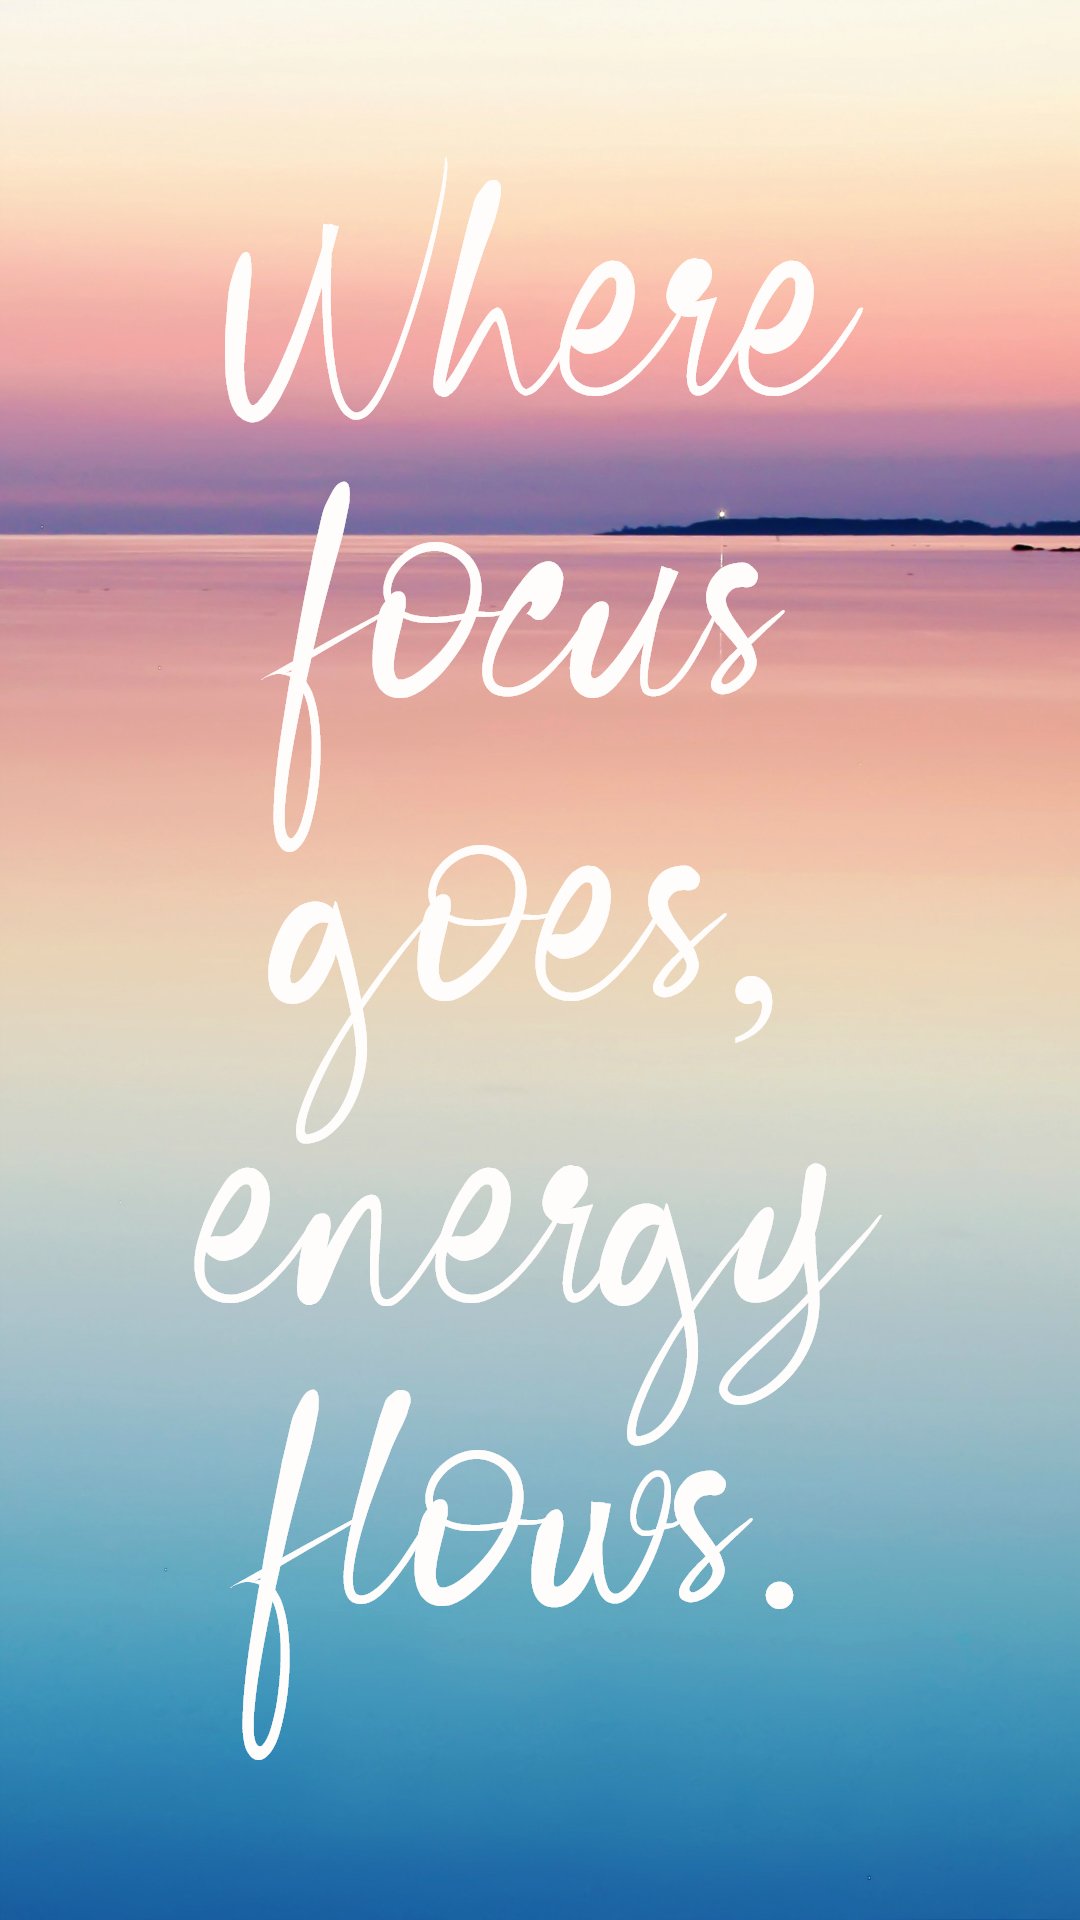 Phone Wallpaper, Phone Background, Quotes To Live By, Focus Goes Energy Flows